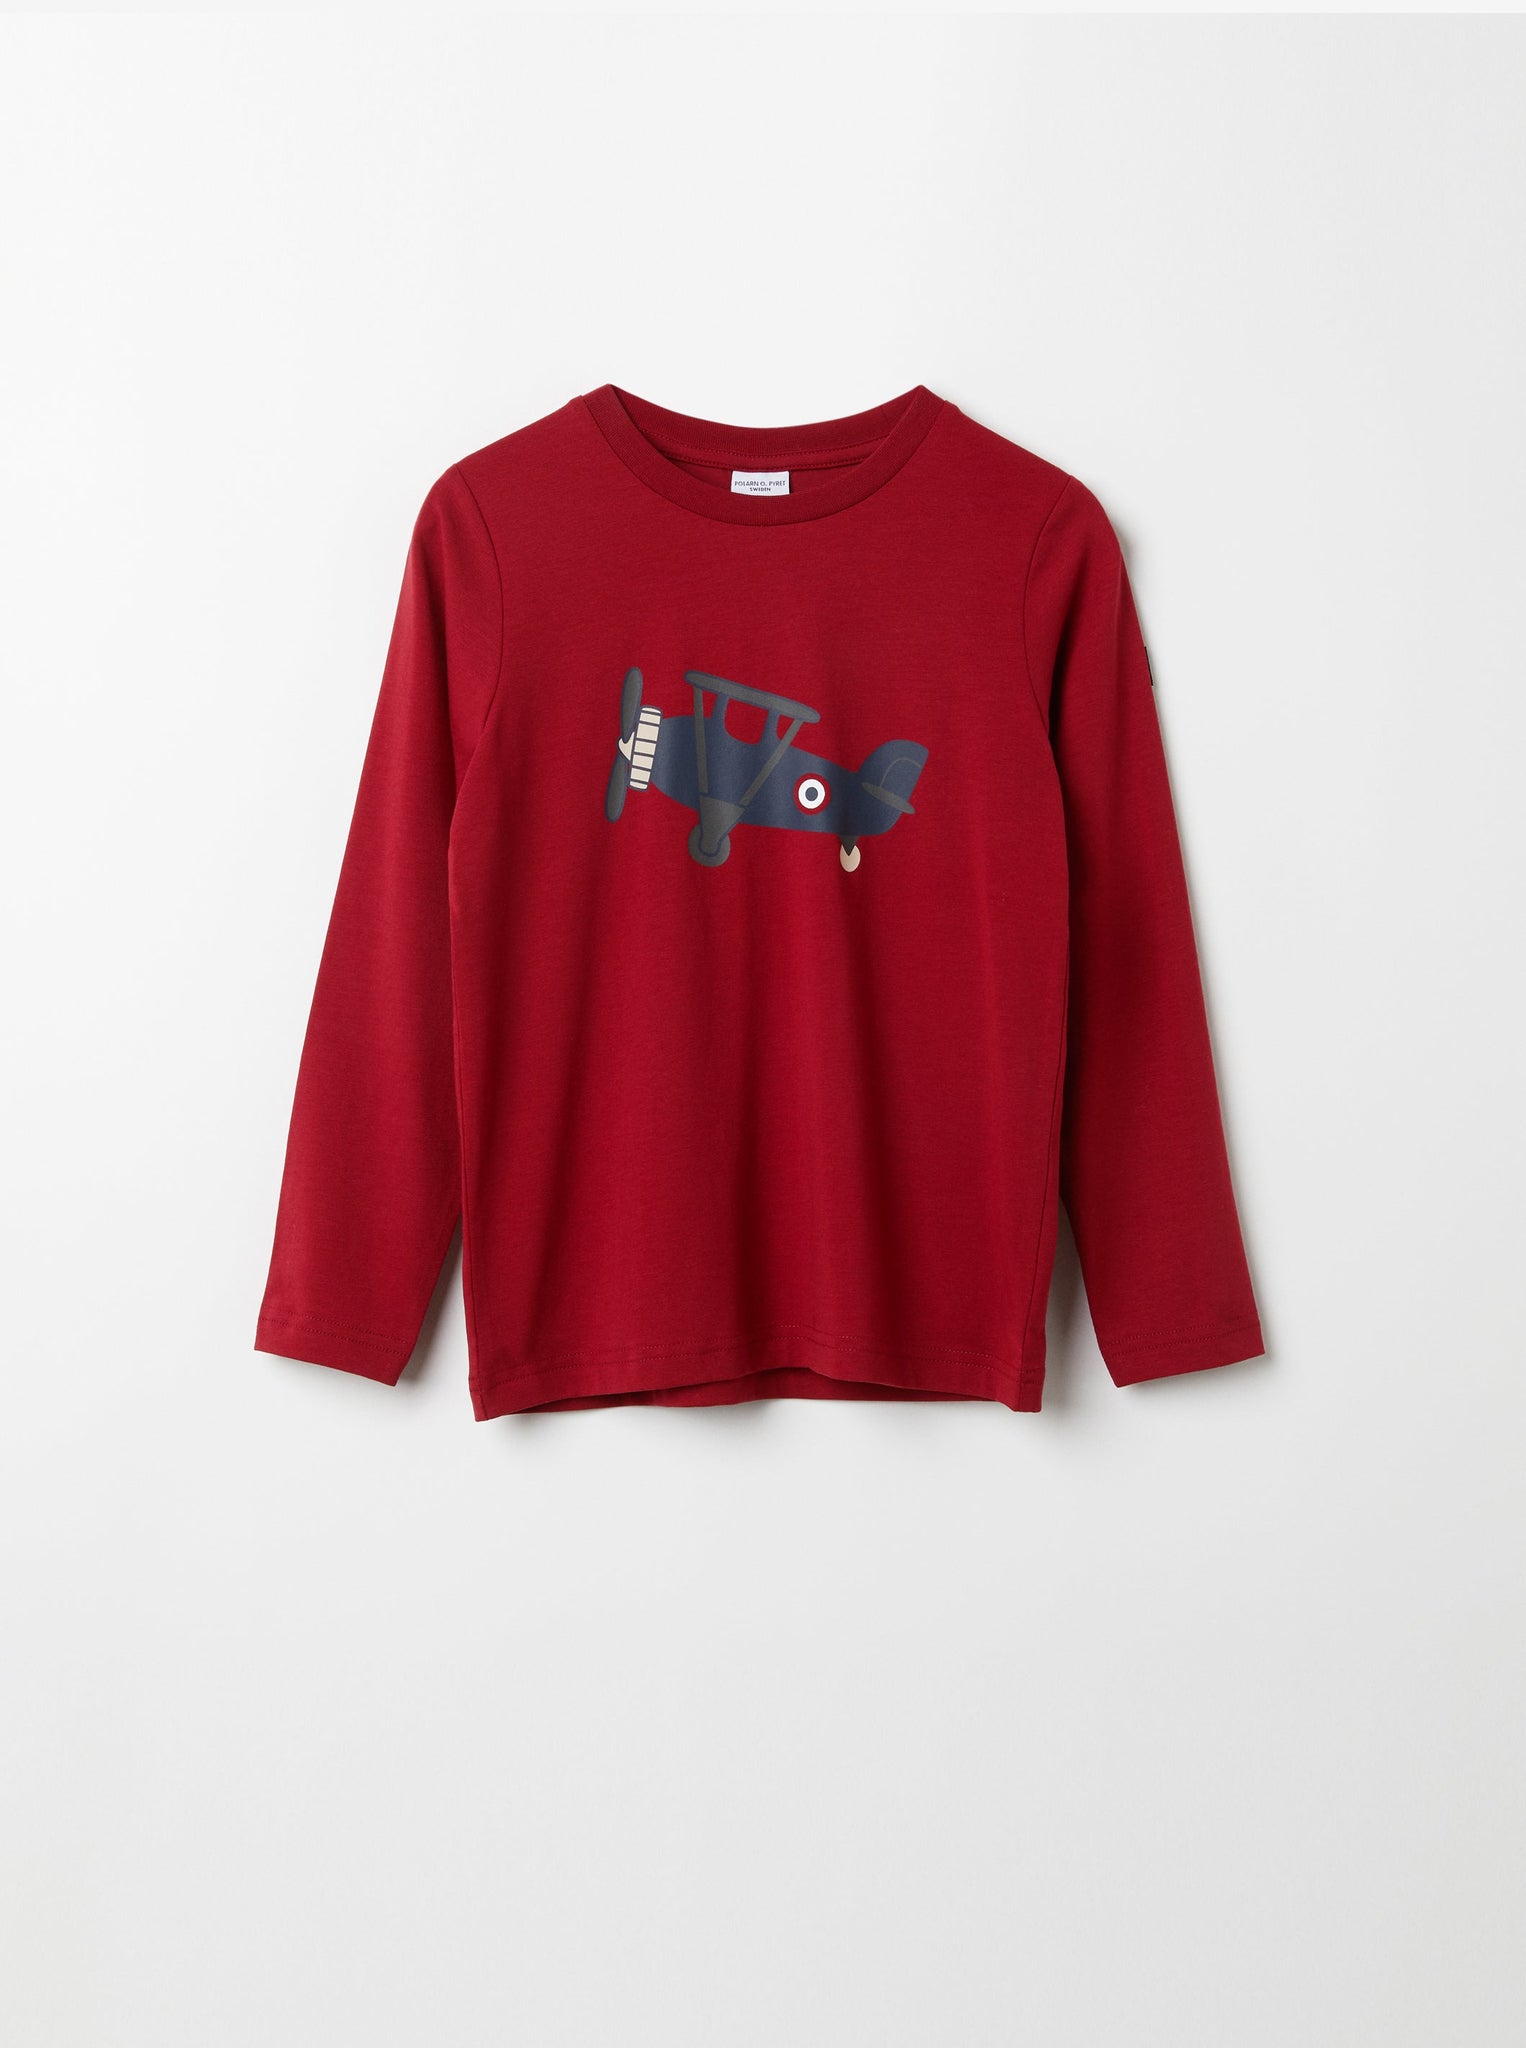 Red Airplane Print Kids Sweatshirt from the Polarn O. Pyret kidswear collection. The best ethical kids clothes